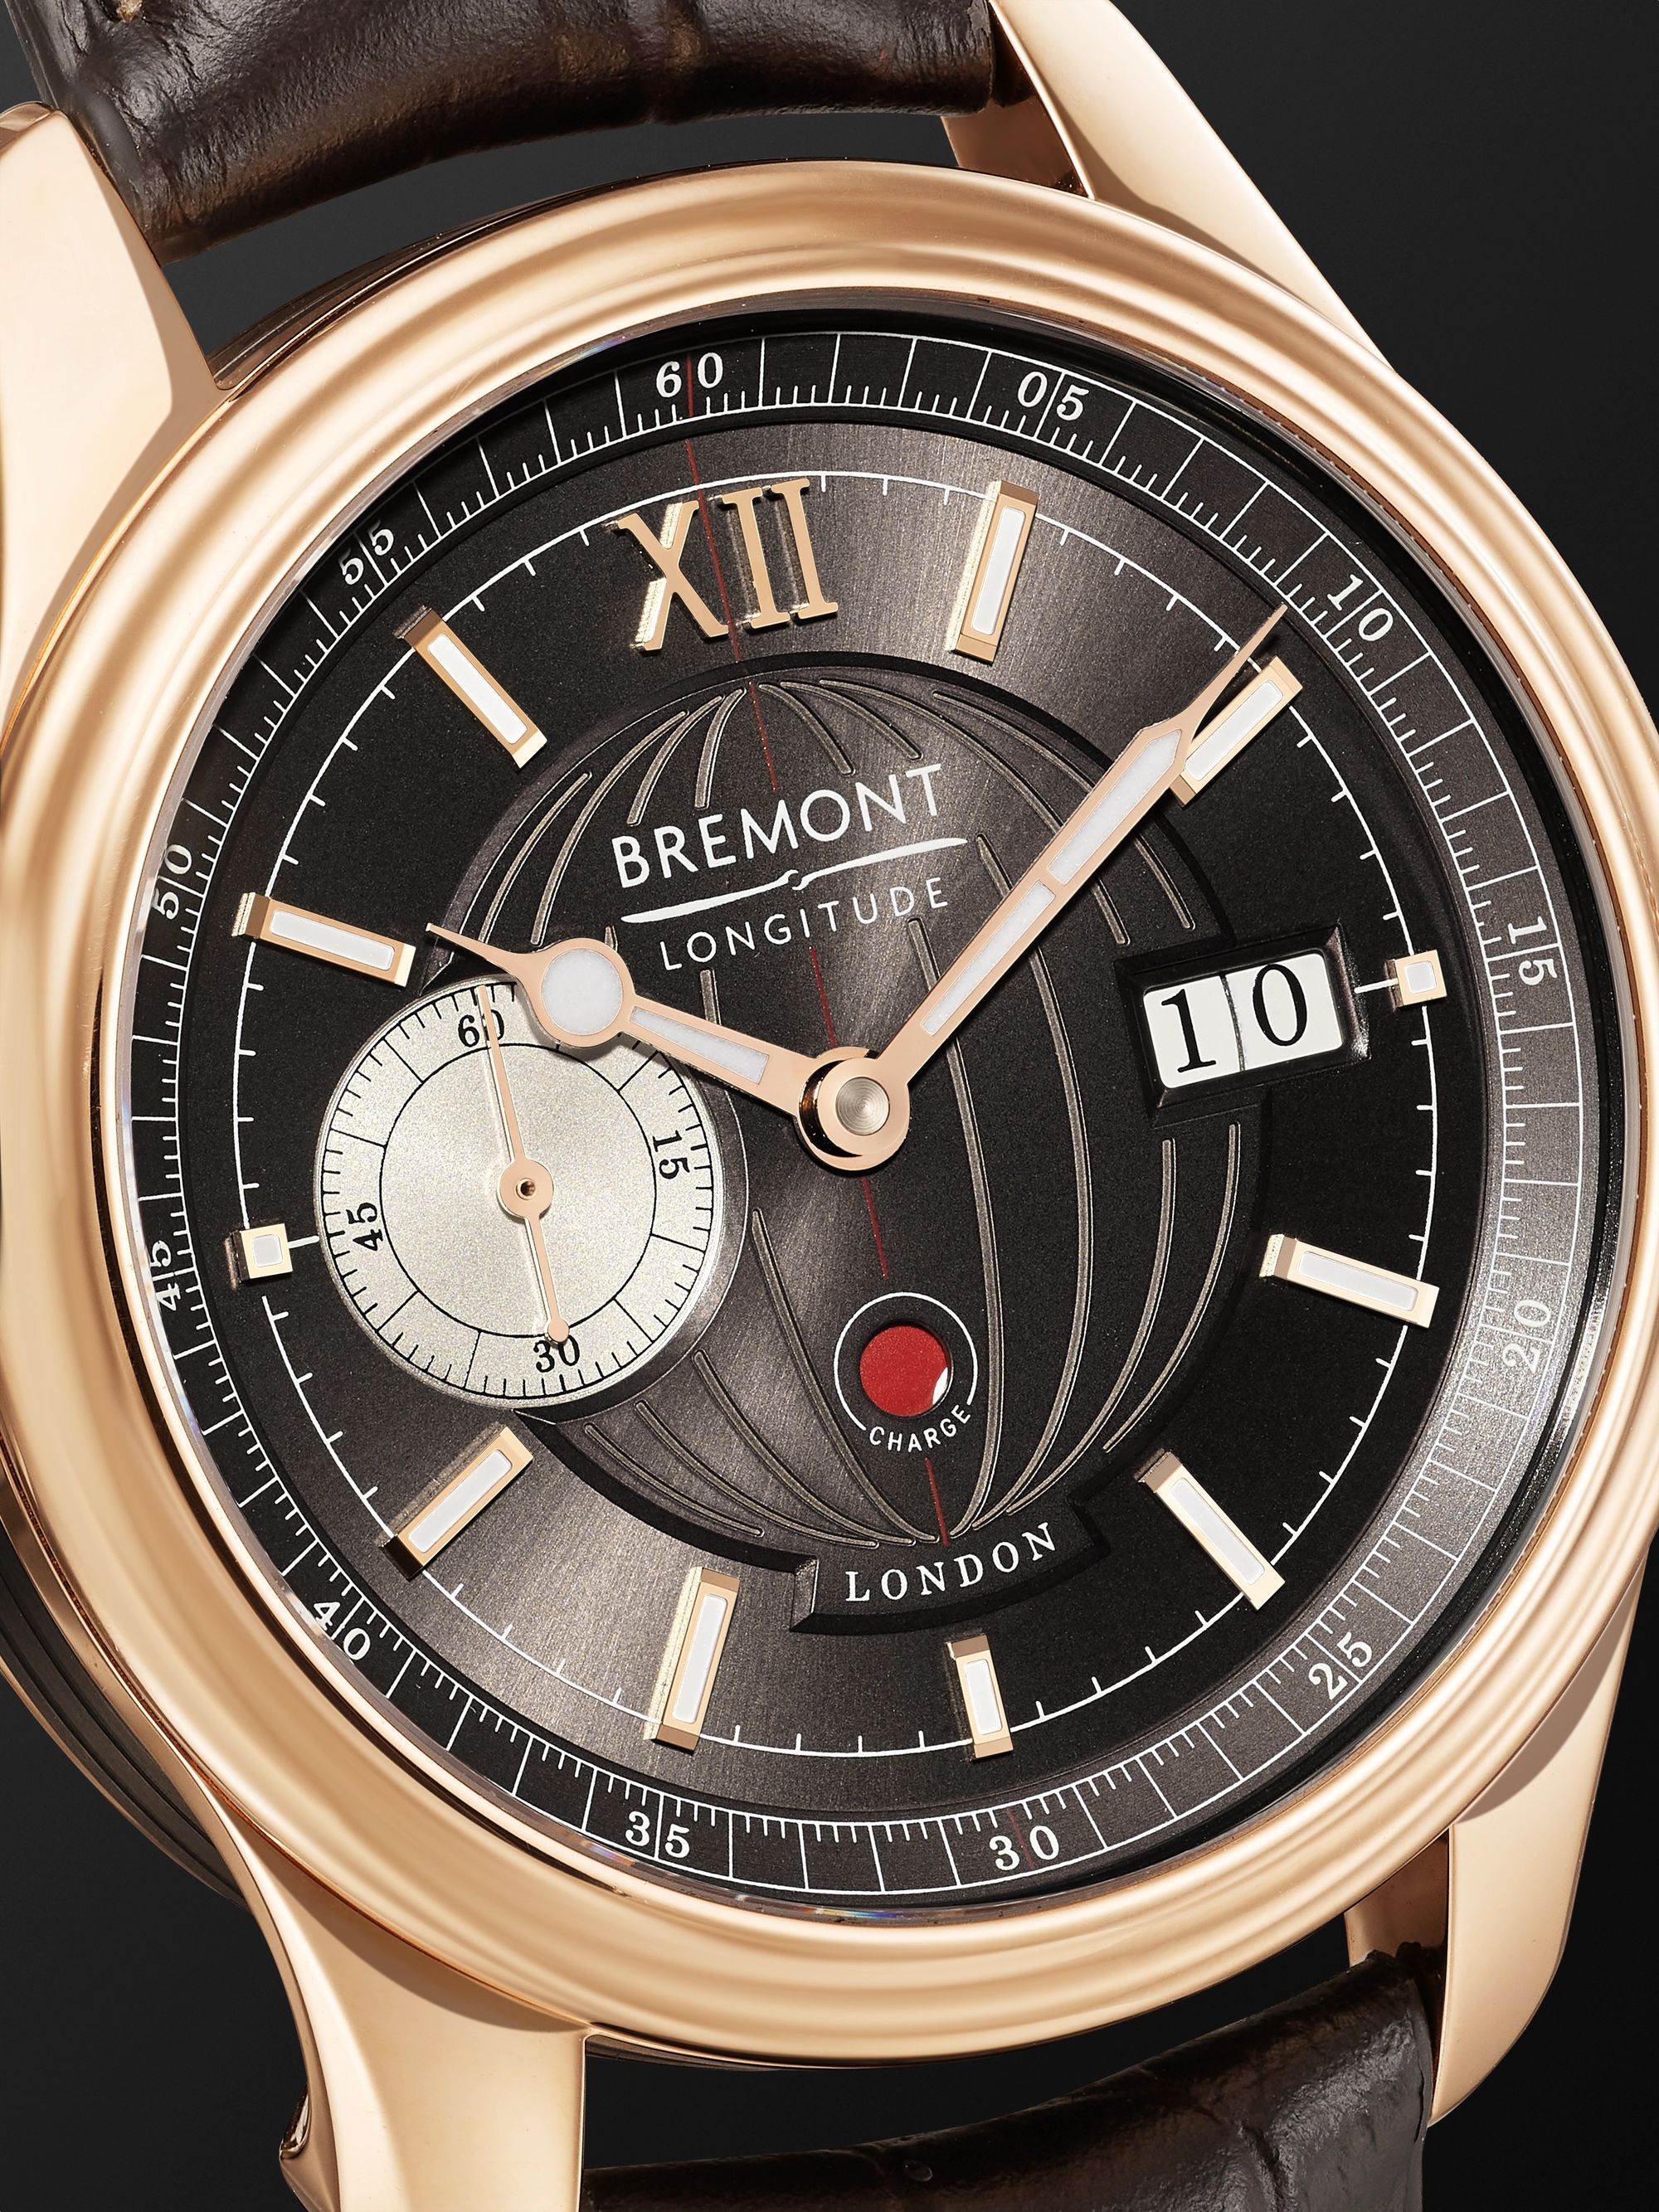 BREMONT Longitude Limited Edition Automatic 40mm 18-Karat Rose Gold and Croc-Effect Leather Watch, Ref. No. LONGITUDE-RG